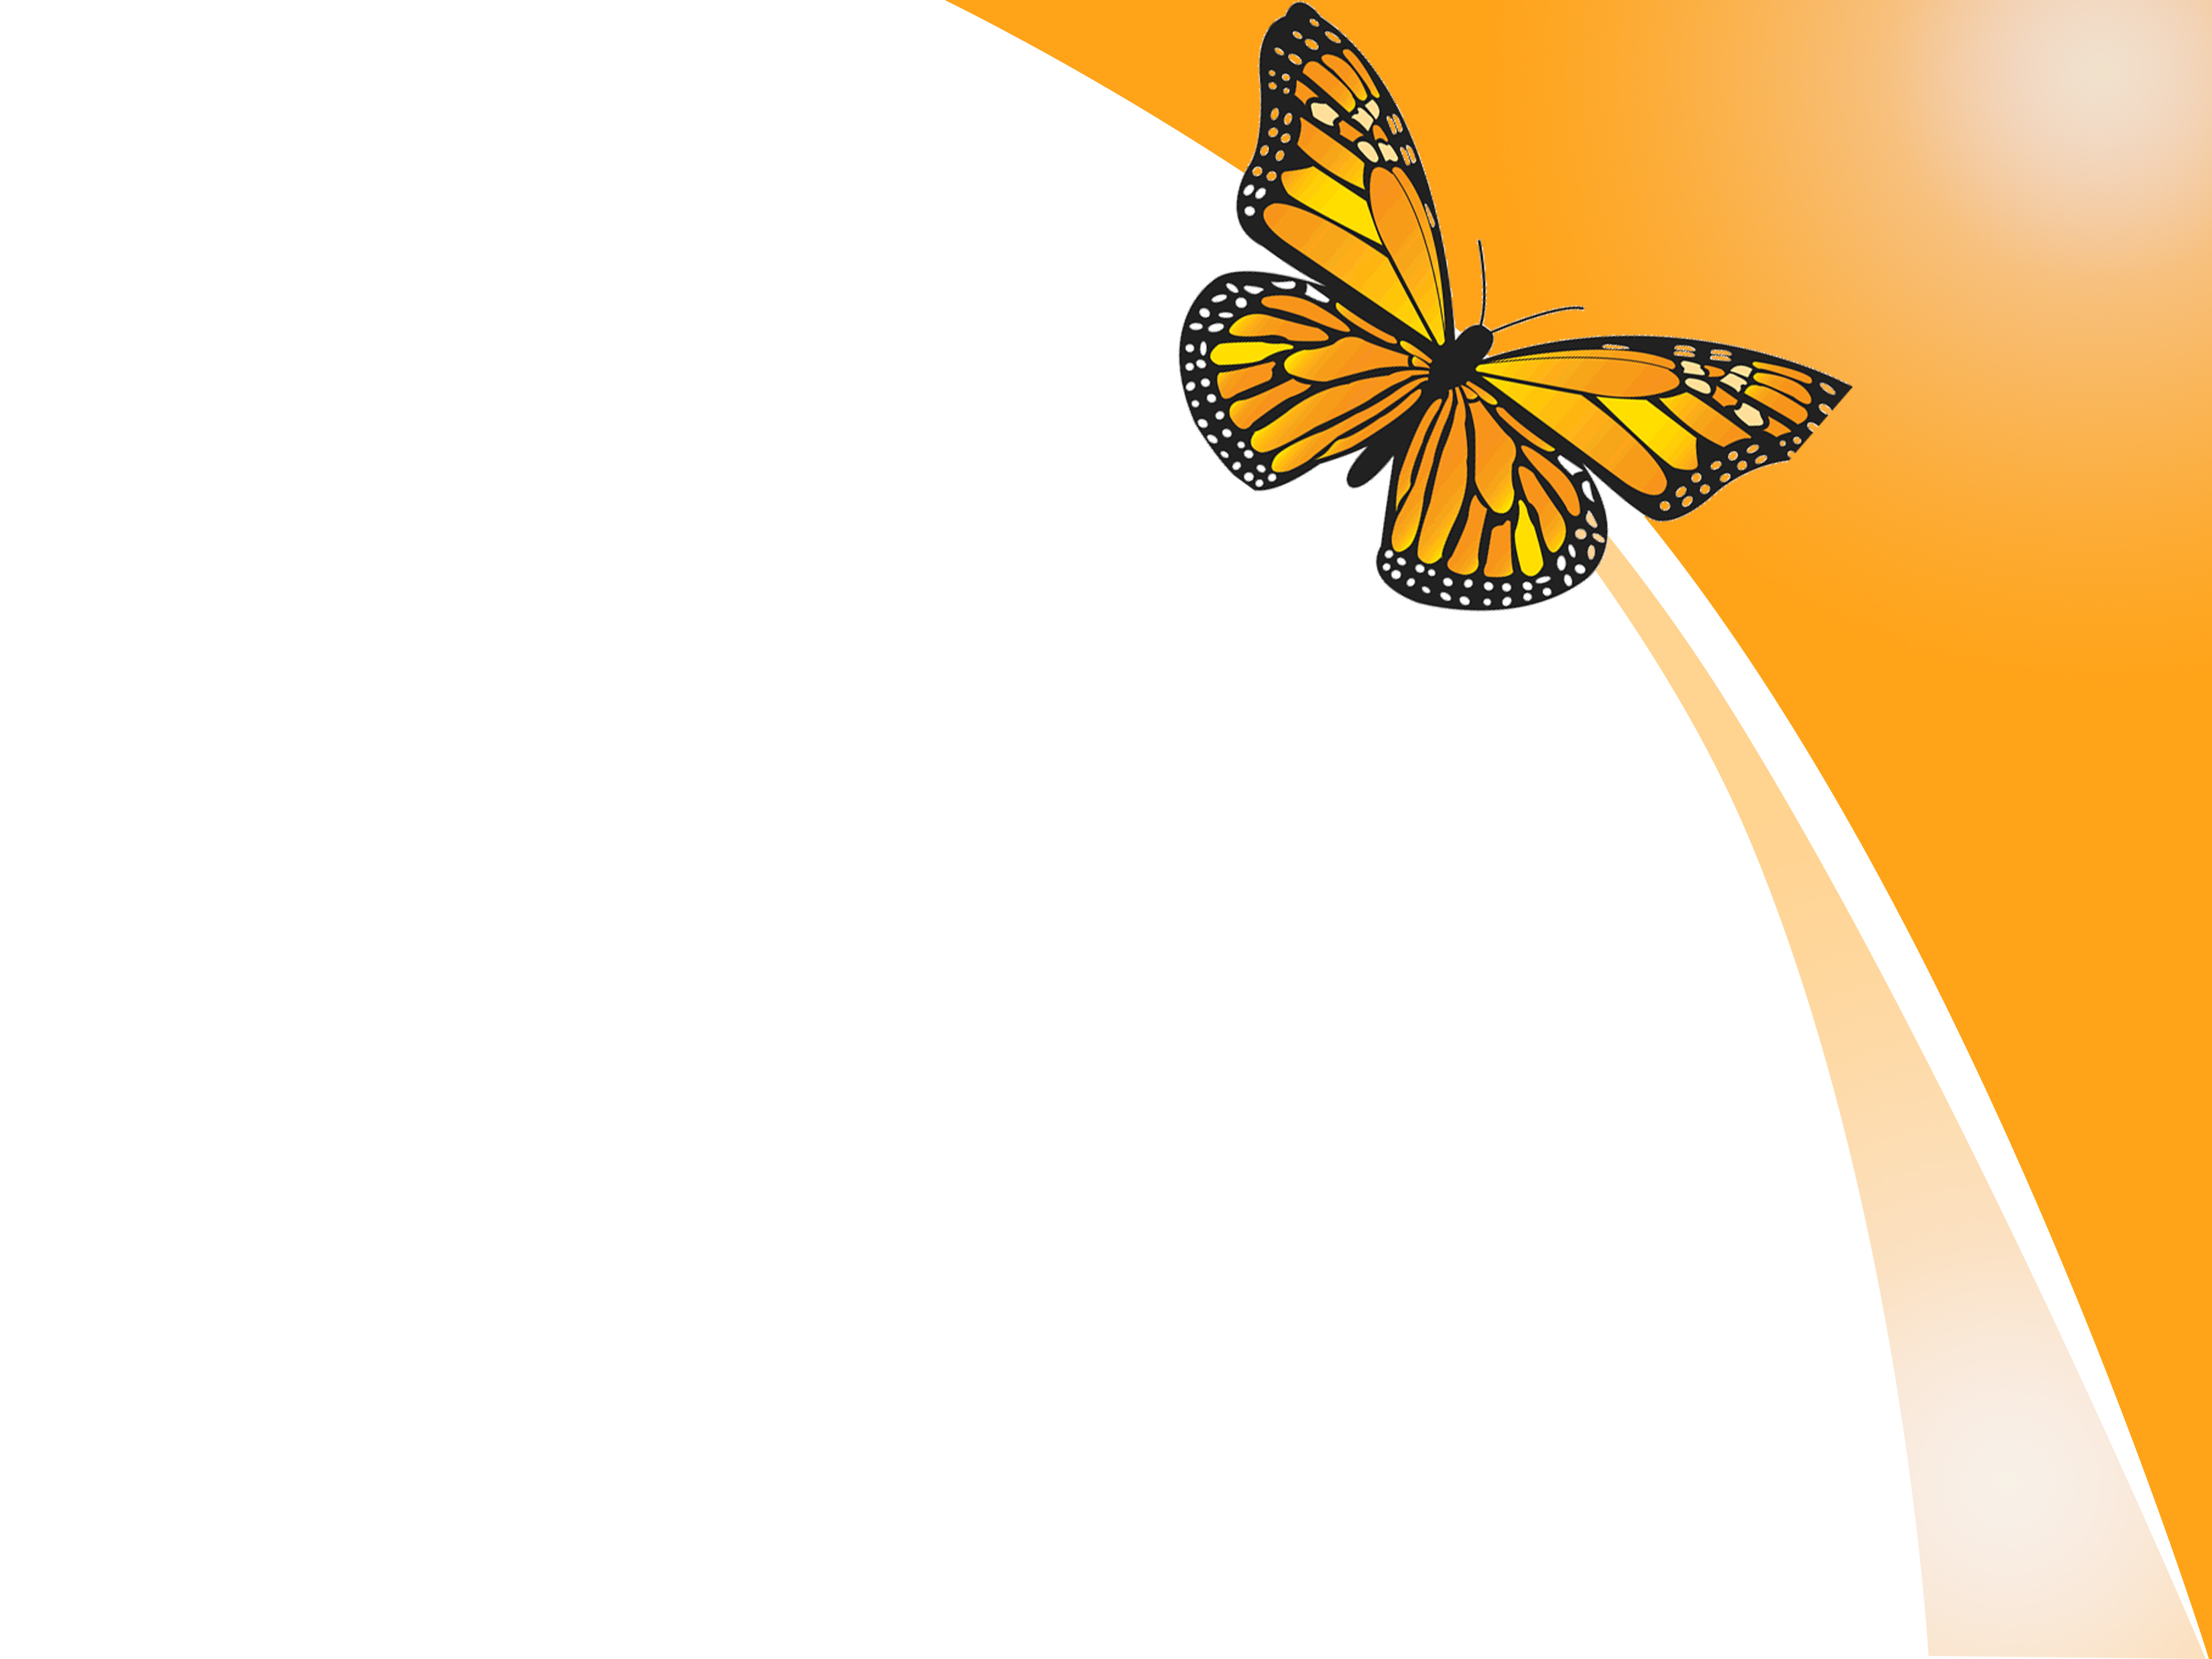 Orange Butterfly Design 1024x768 pixel PPT Backgrounds for ...